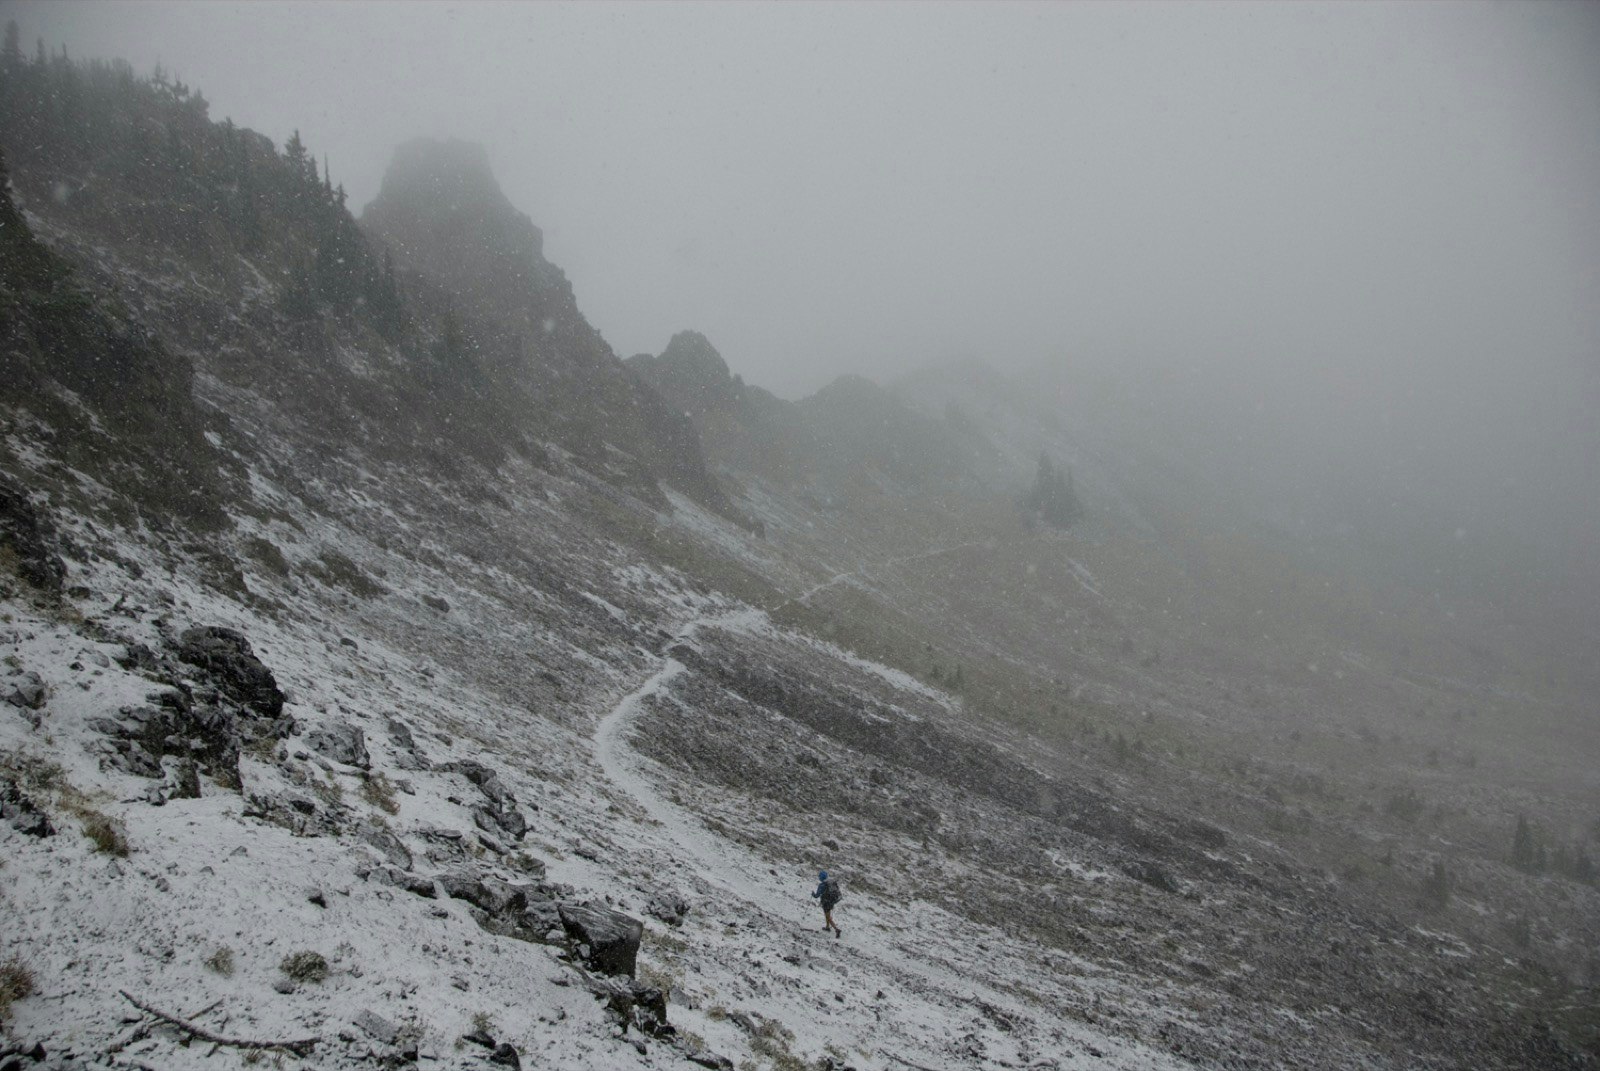 Snow dusts a lonely portion of the trail as a solitary hiker makes his way through a mountain pass shrouded in fog on the Pacific Crest Trail © Sean Jansen / Lonely Planet 